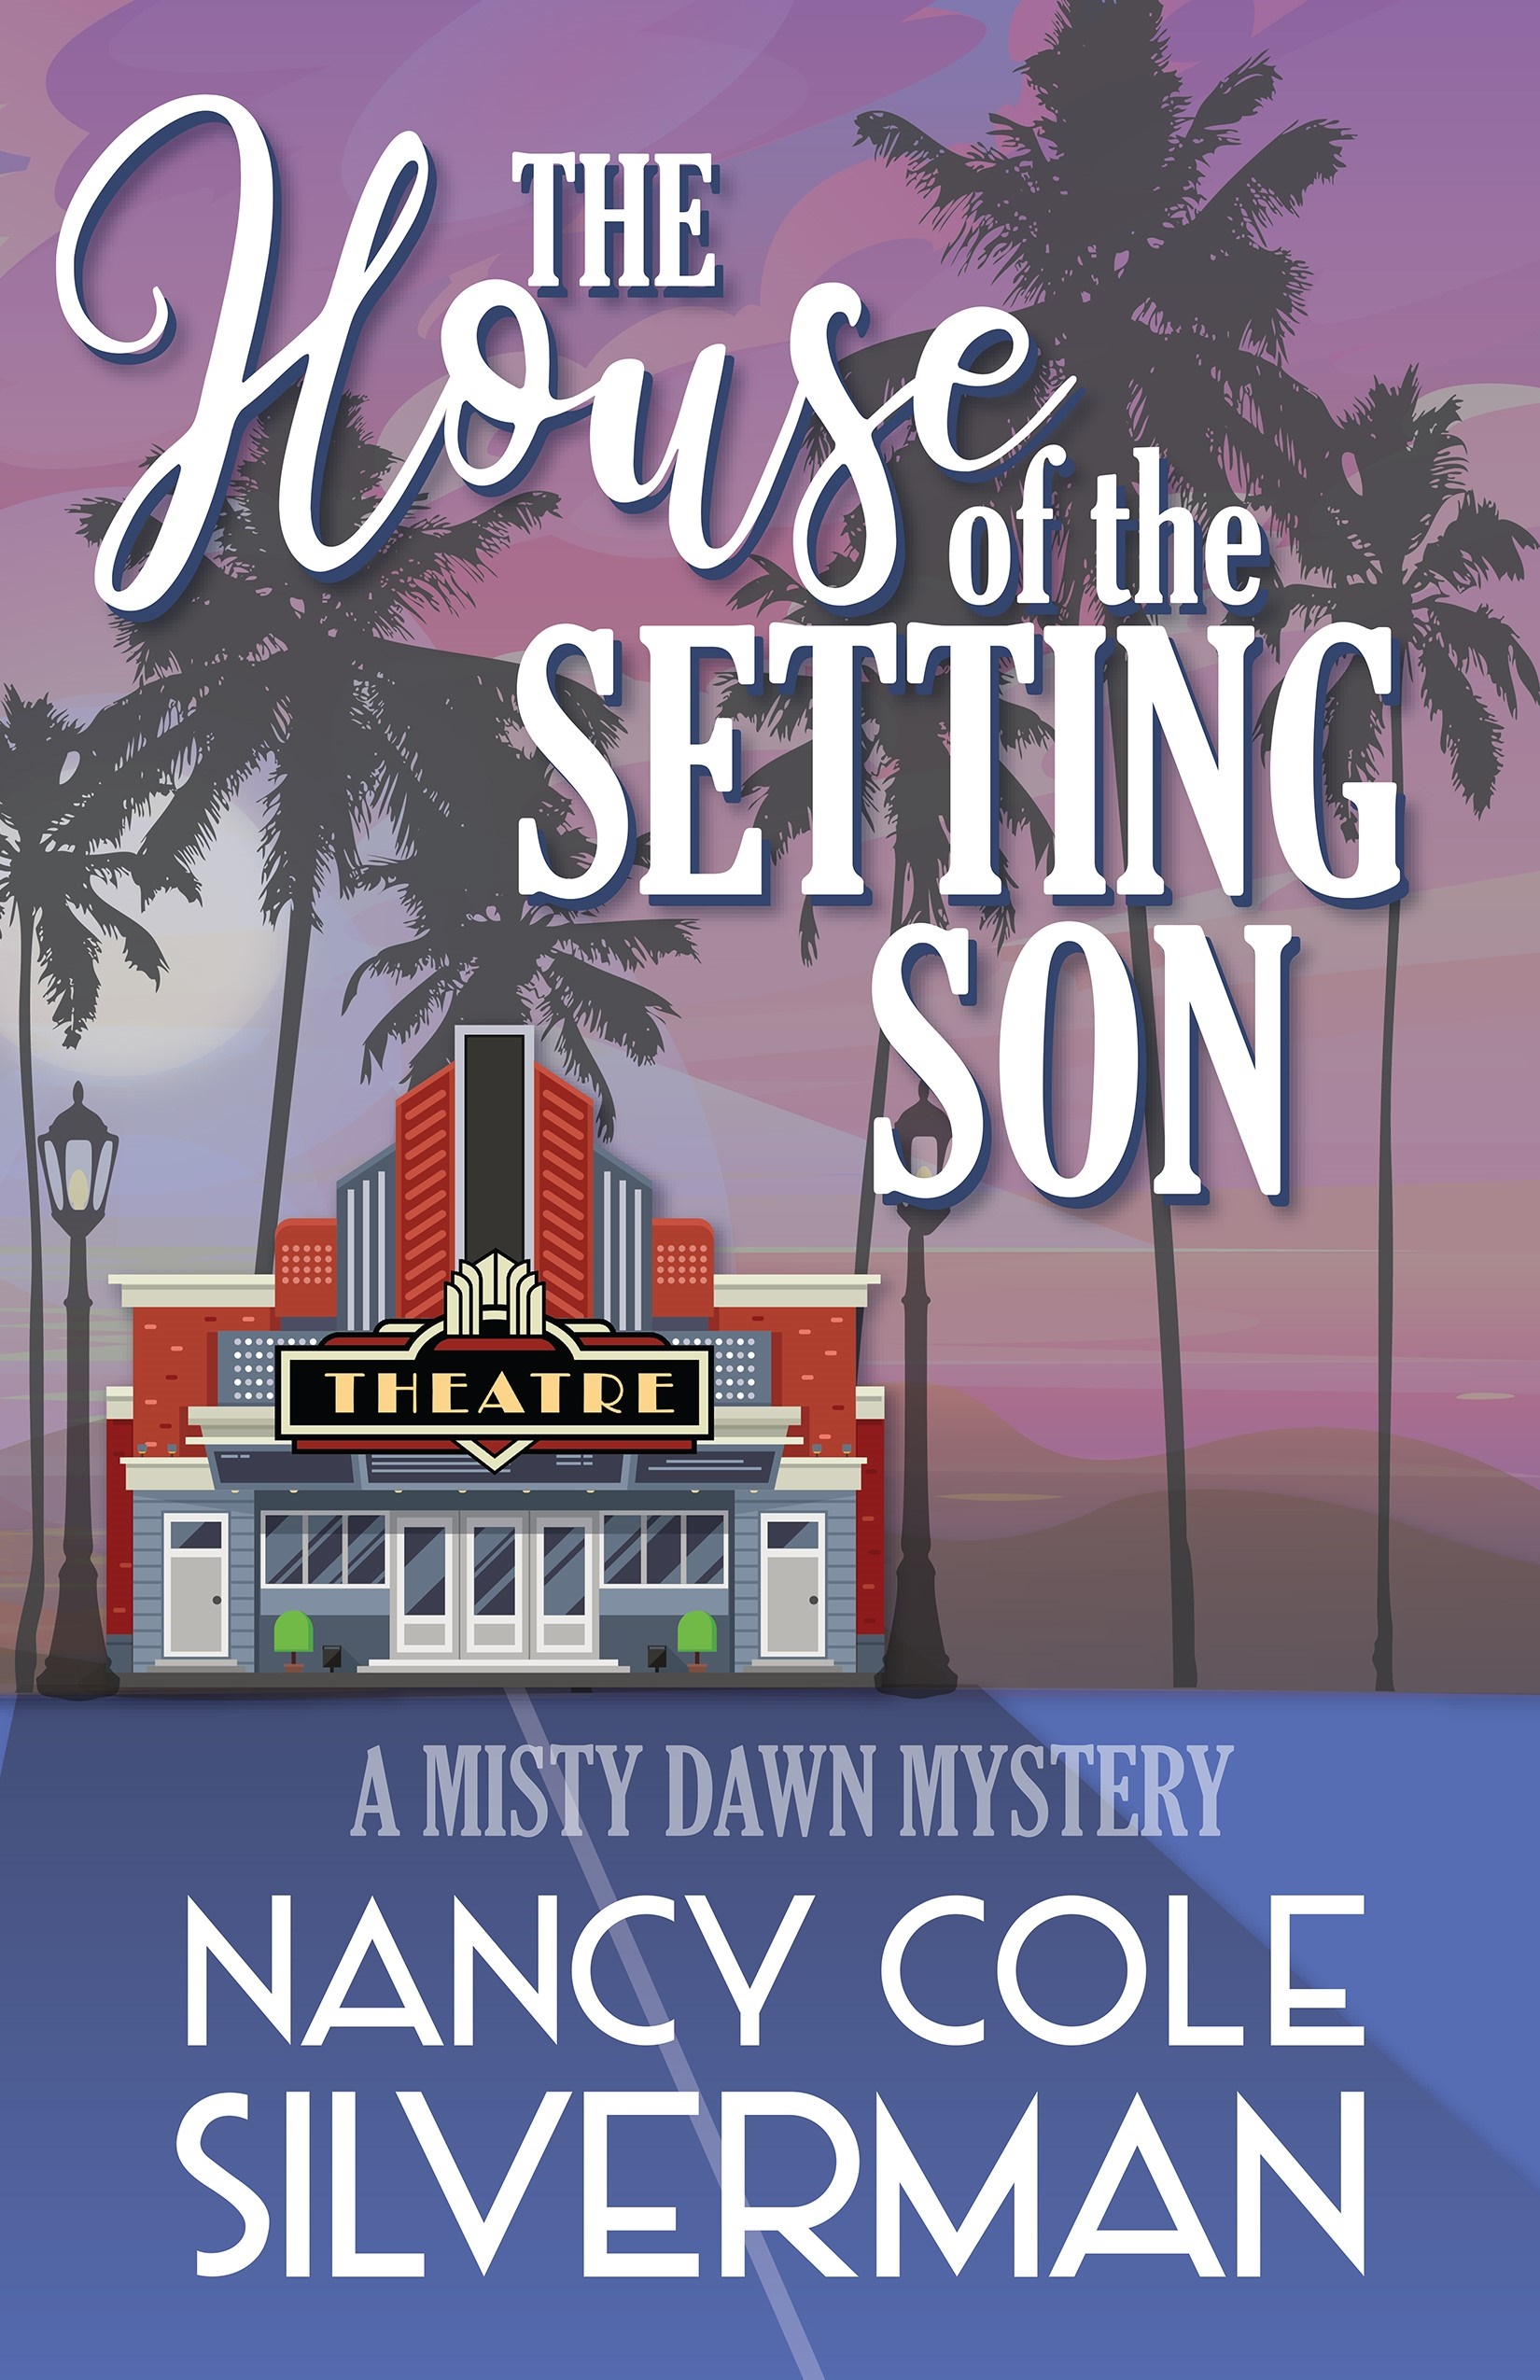 THE HOUSE OF THE SETTING SON by Nancy Cole Silverman